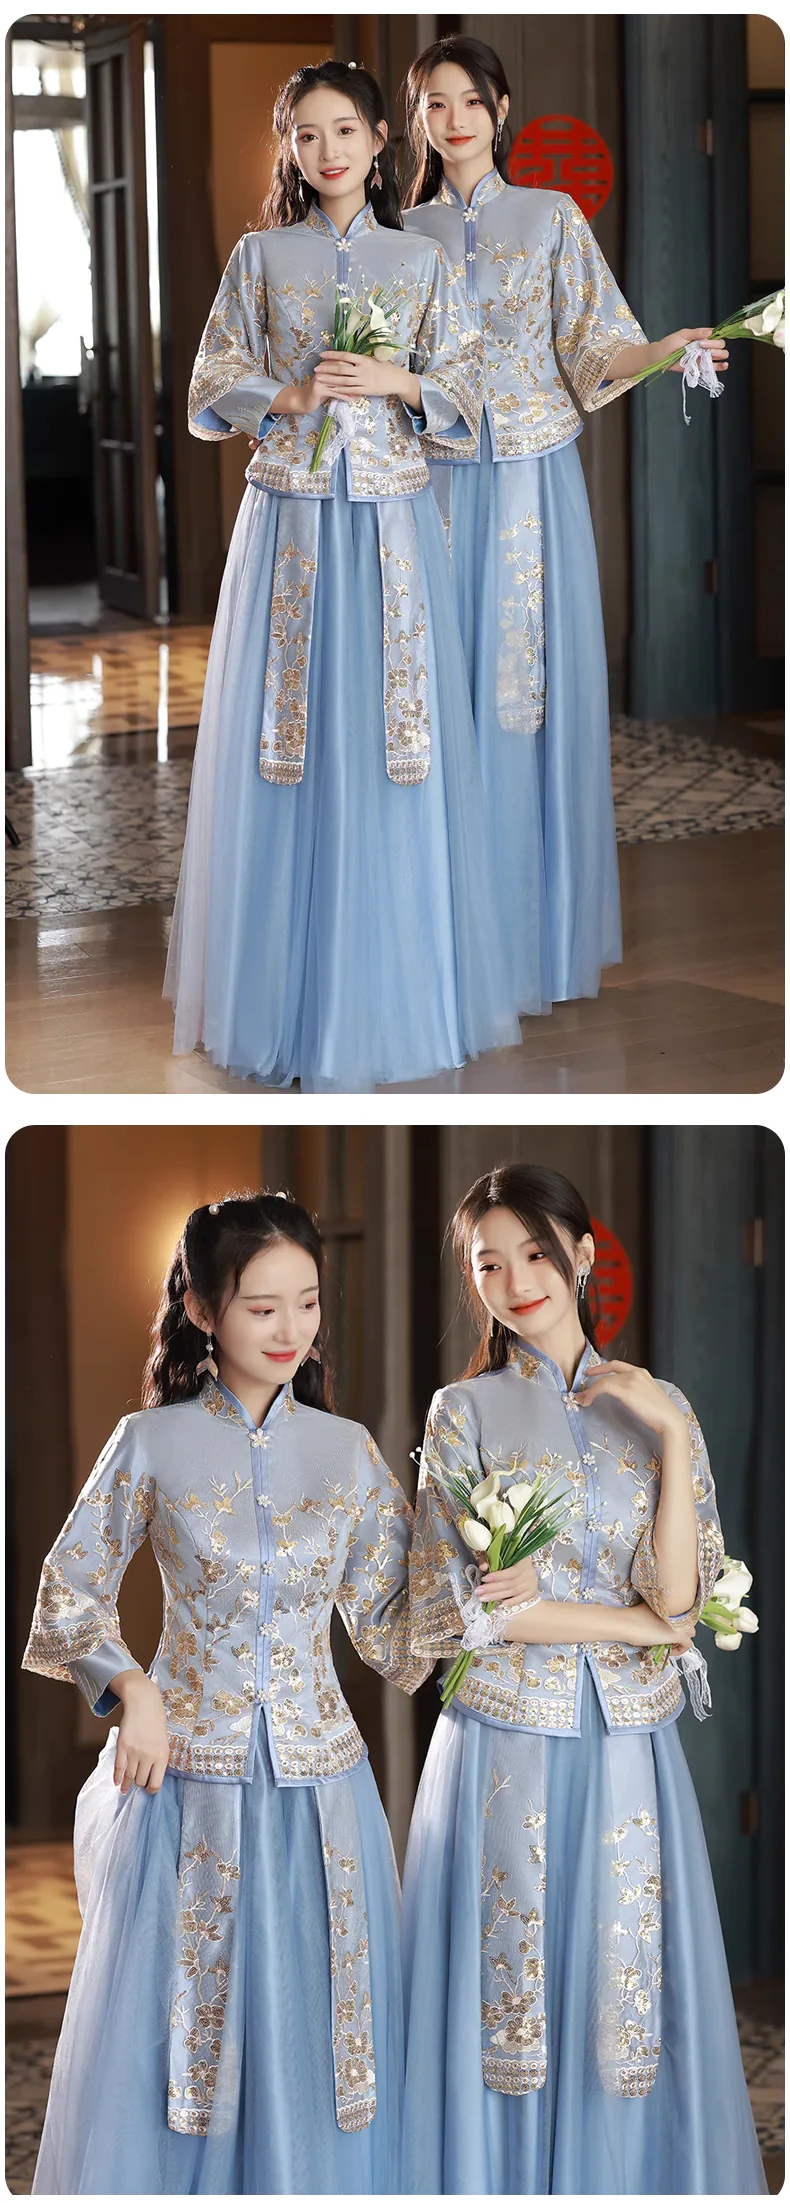 Chinese-Traditional-Style-Blue-Bridal-Wedding-Party-Bridesmaid-Dress14